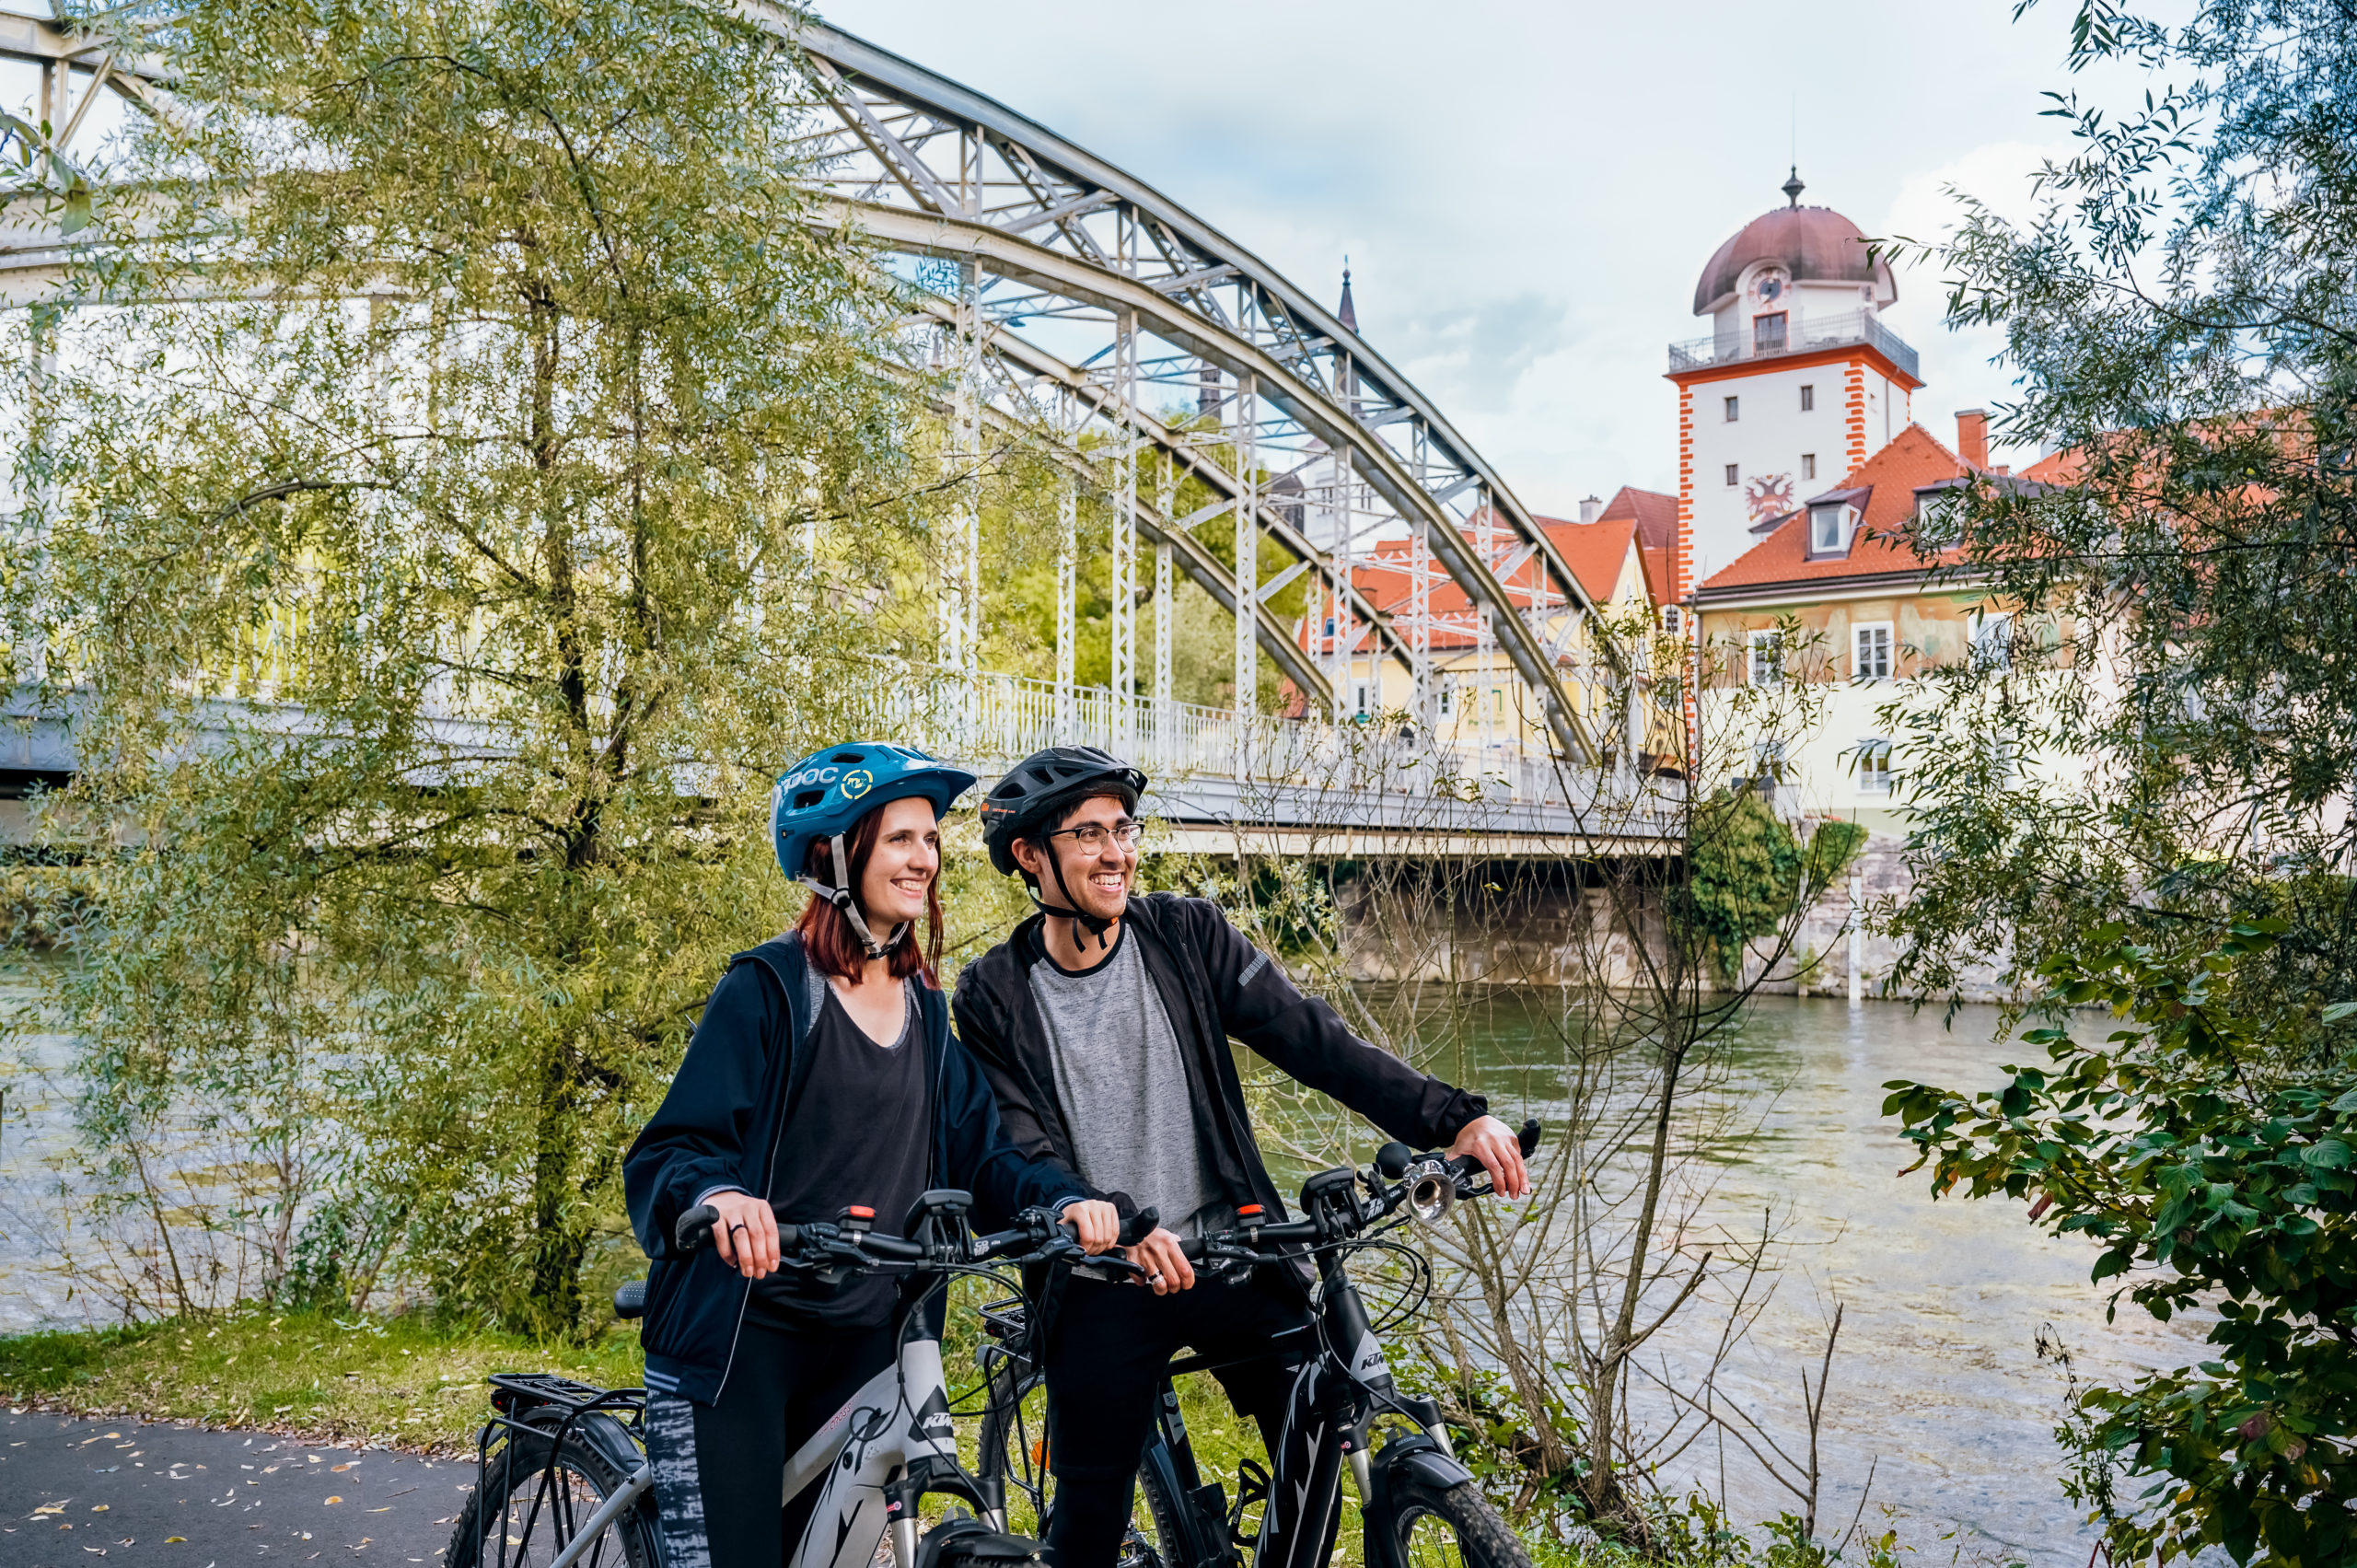 explore the city of Leoben by bike - a great vacation